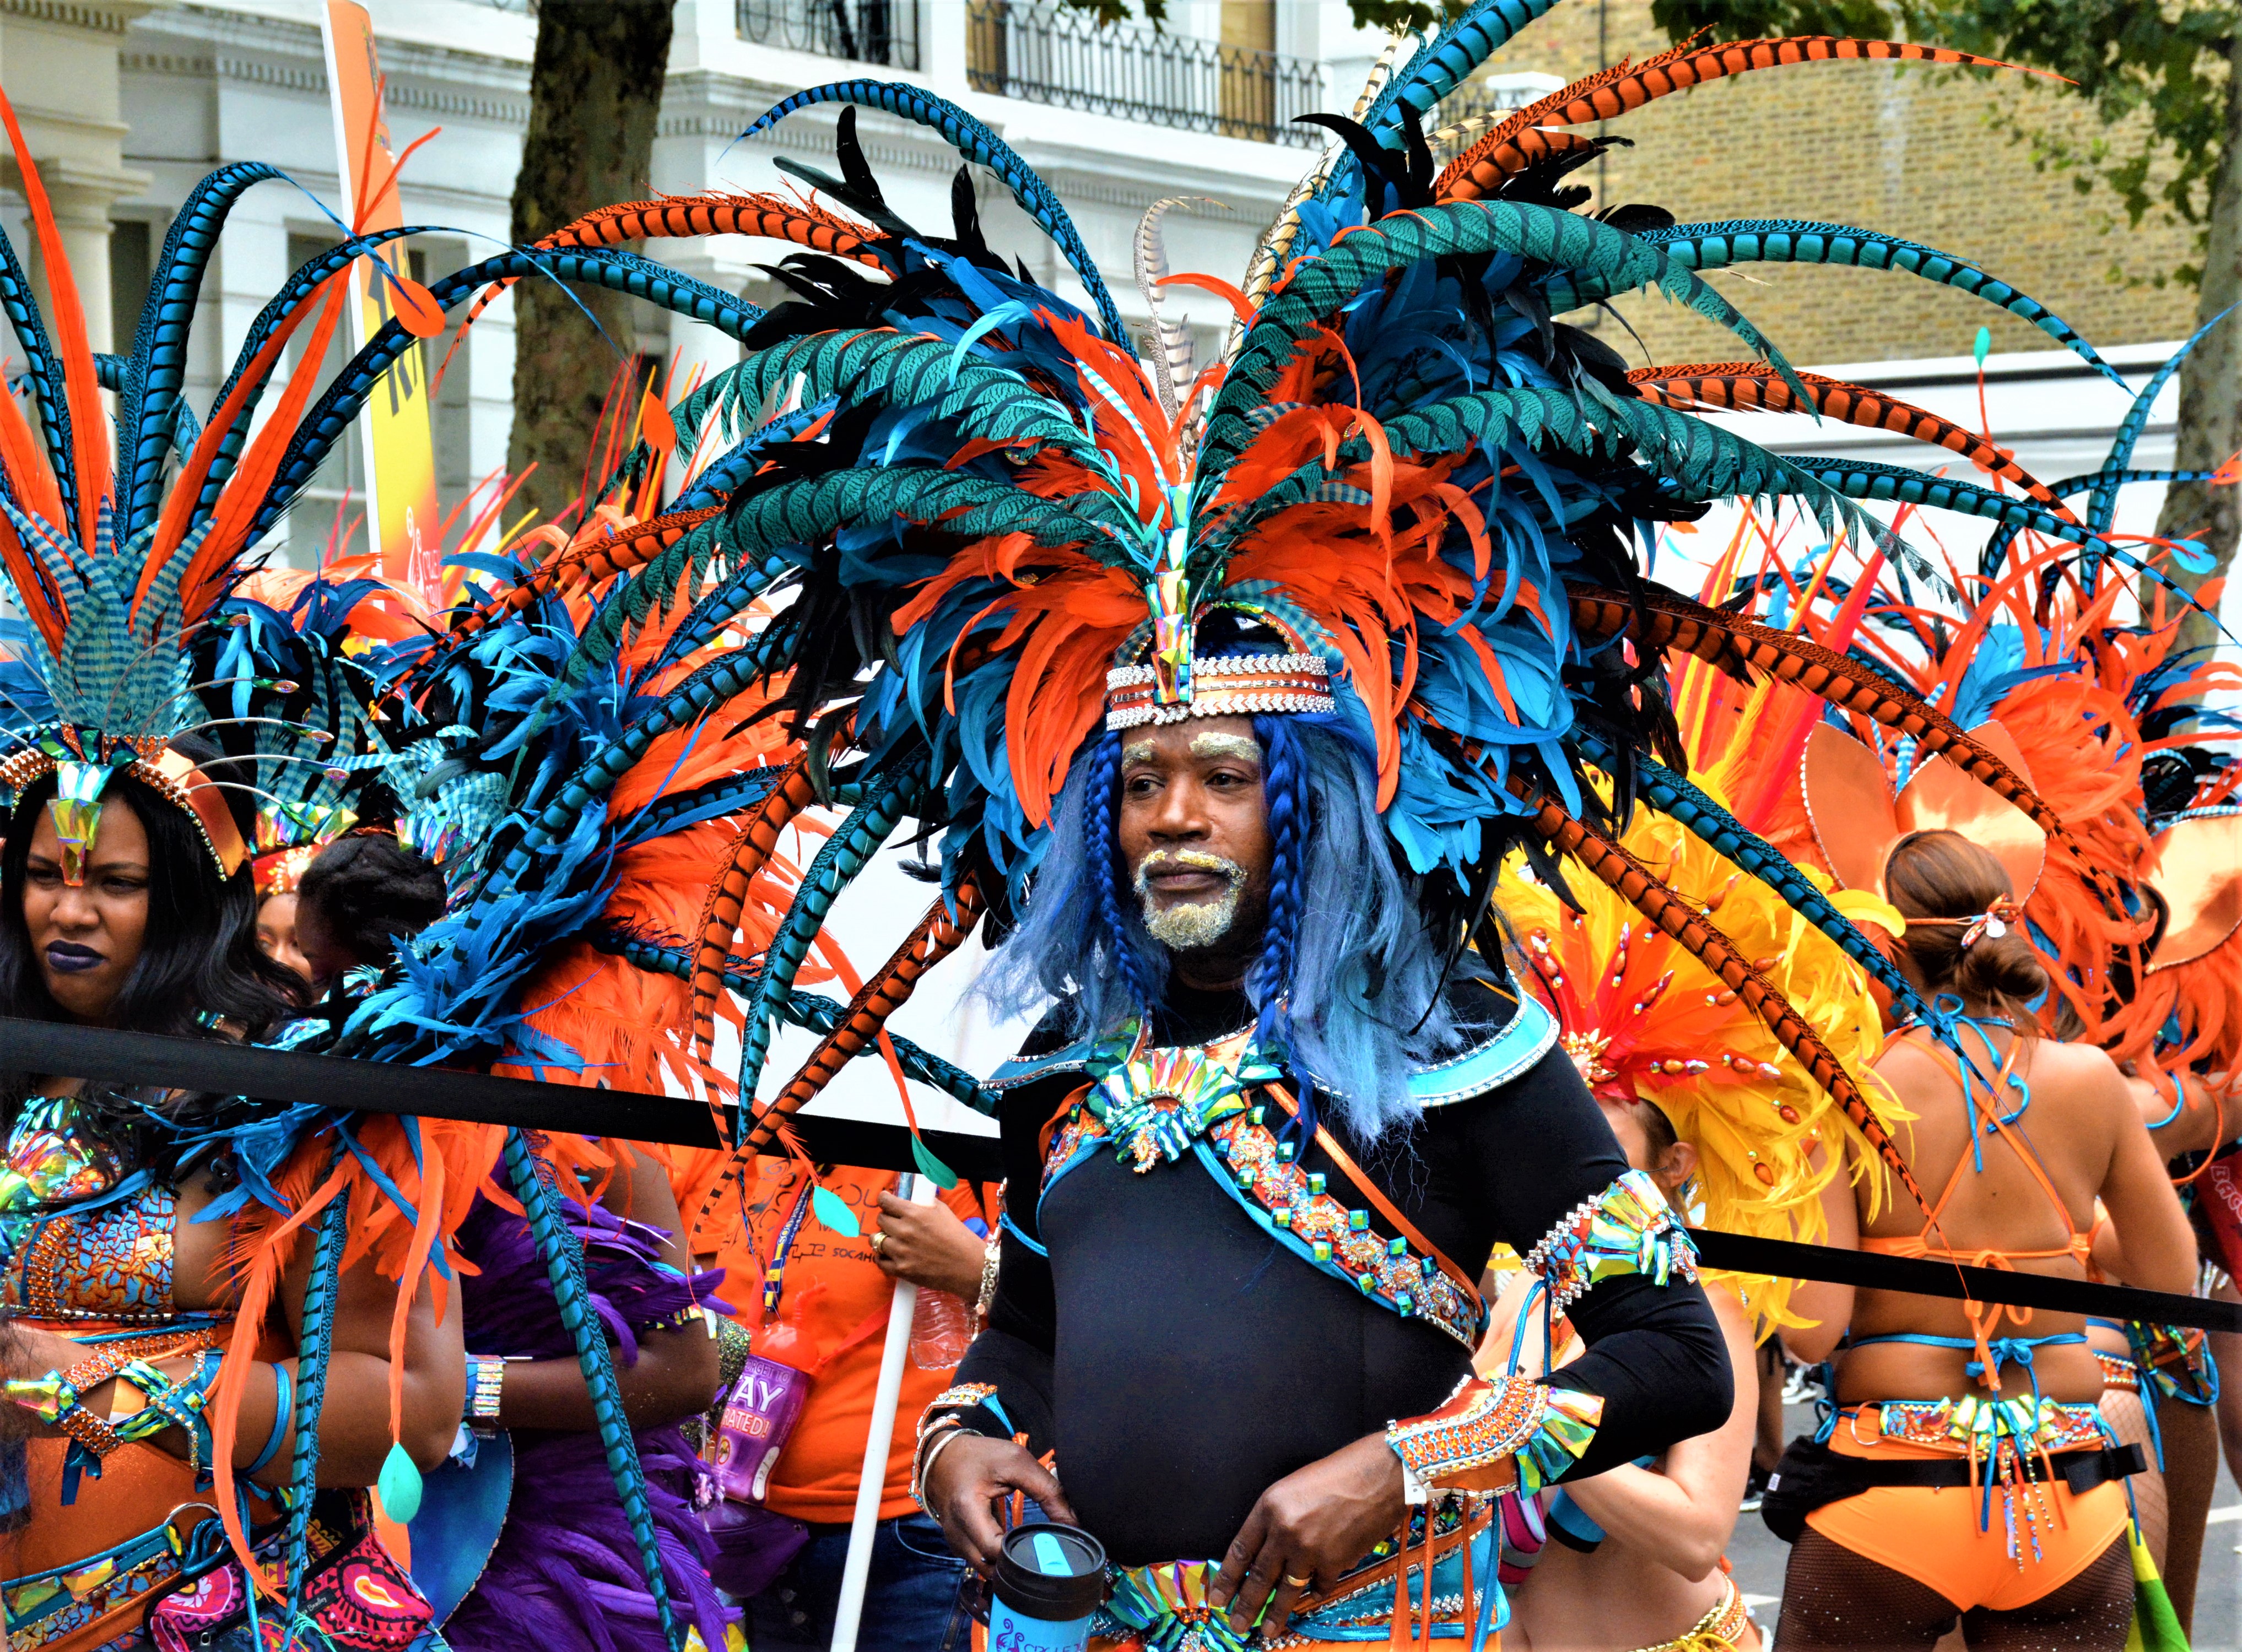 Notting Hill Carnival 2020: Watch it live on YouTube, Google Arts & Culture